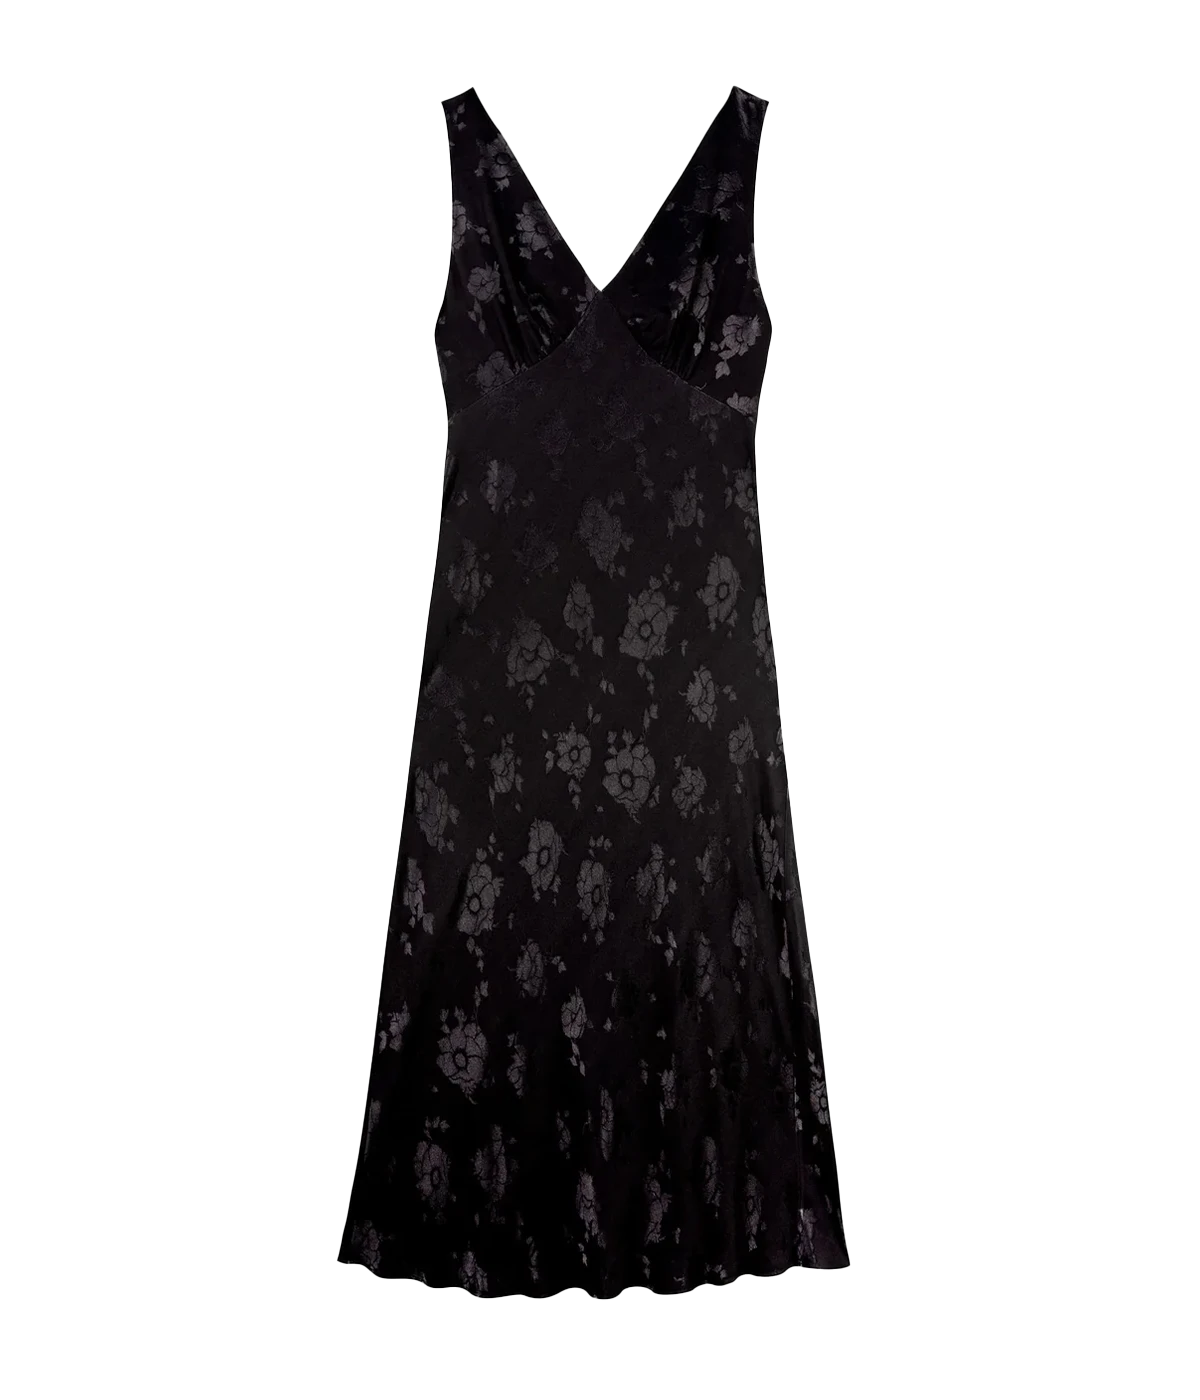 One hundred percent viscose sleeveless black midi dress. An elegant satin finish floral print, empire line, straight hem and mid-length. This black dress is your perfect companion for every occasion, from day to nighttime. A versatile dress you will wear forever. Bra friendly, V Neckline and V Back. 